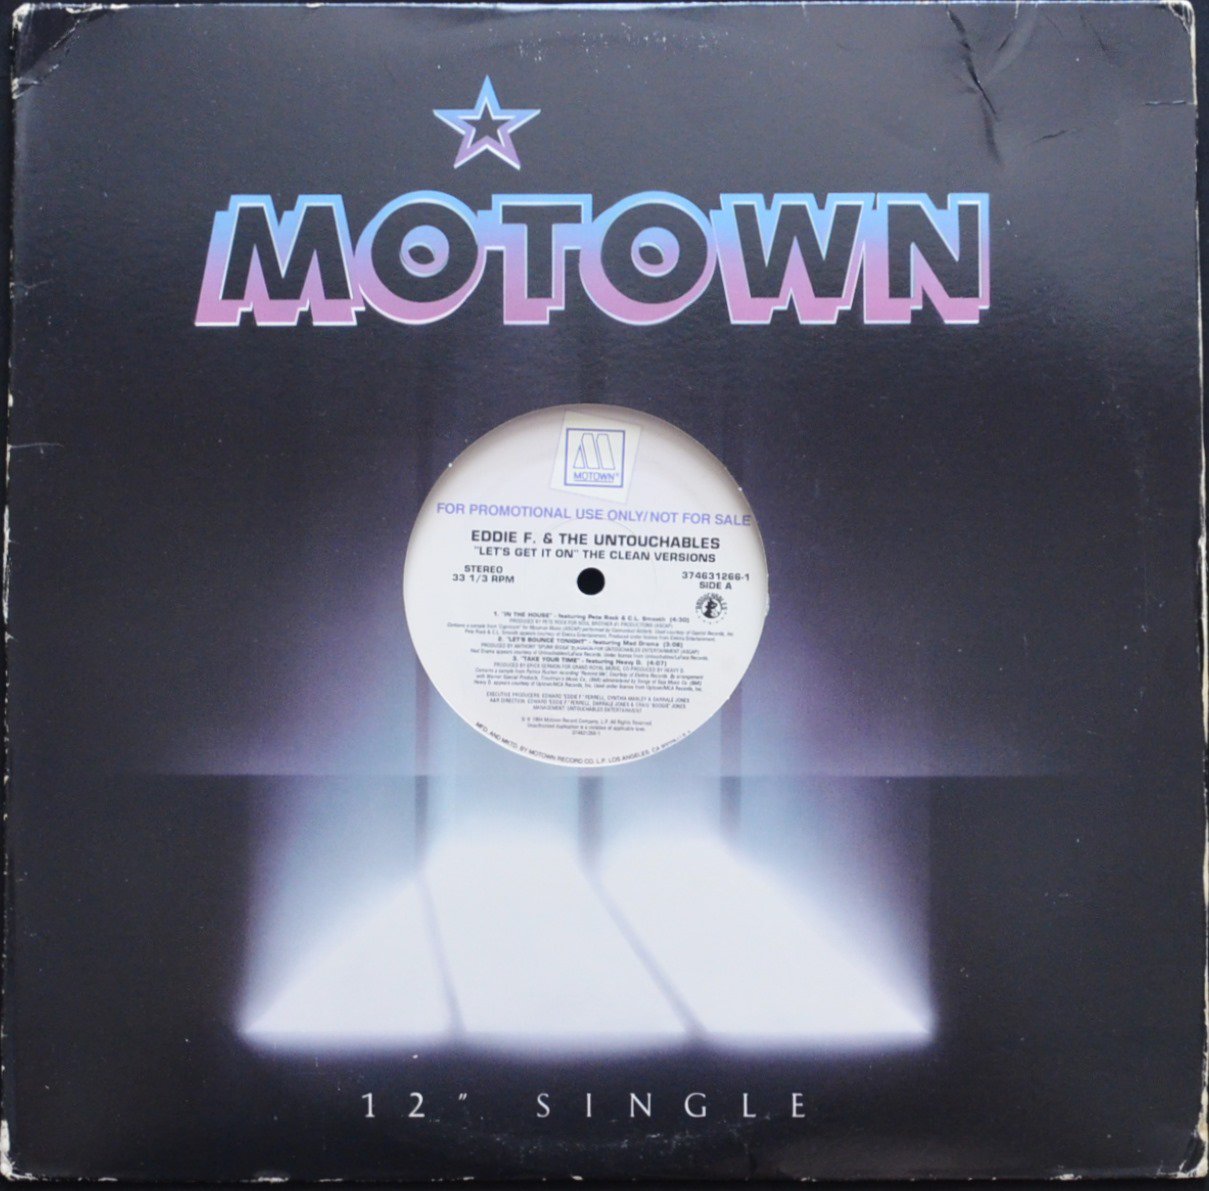 EDDIE F. AND THE UNTOUCHABLES (PETE ROCK & C.L. SMOOTH...) / IN THE HOUSE / LET'S GET IT ON (12